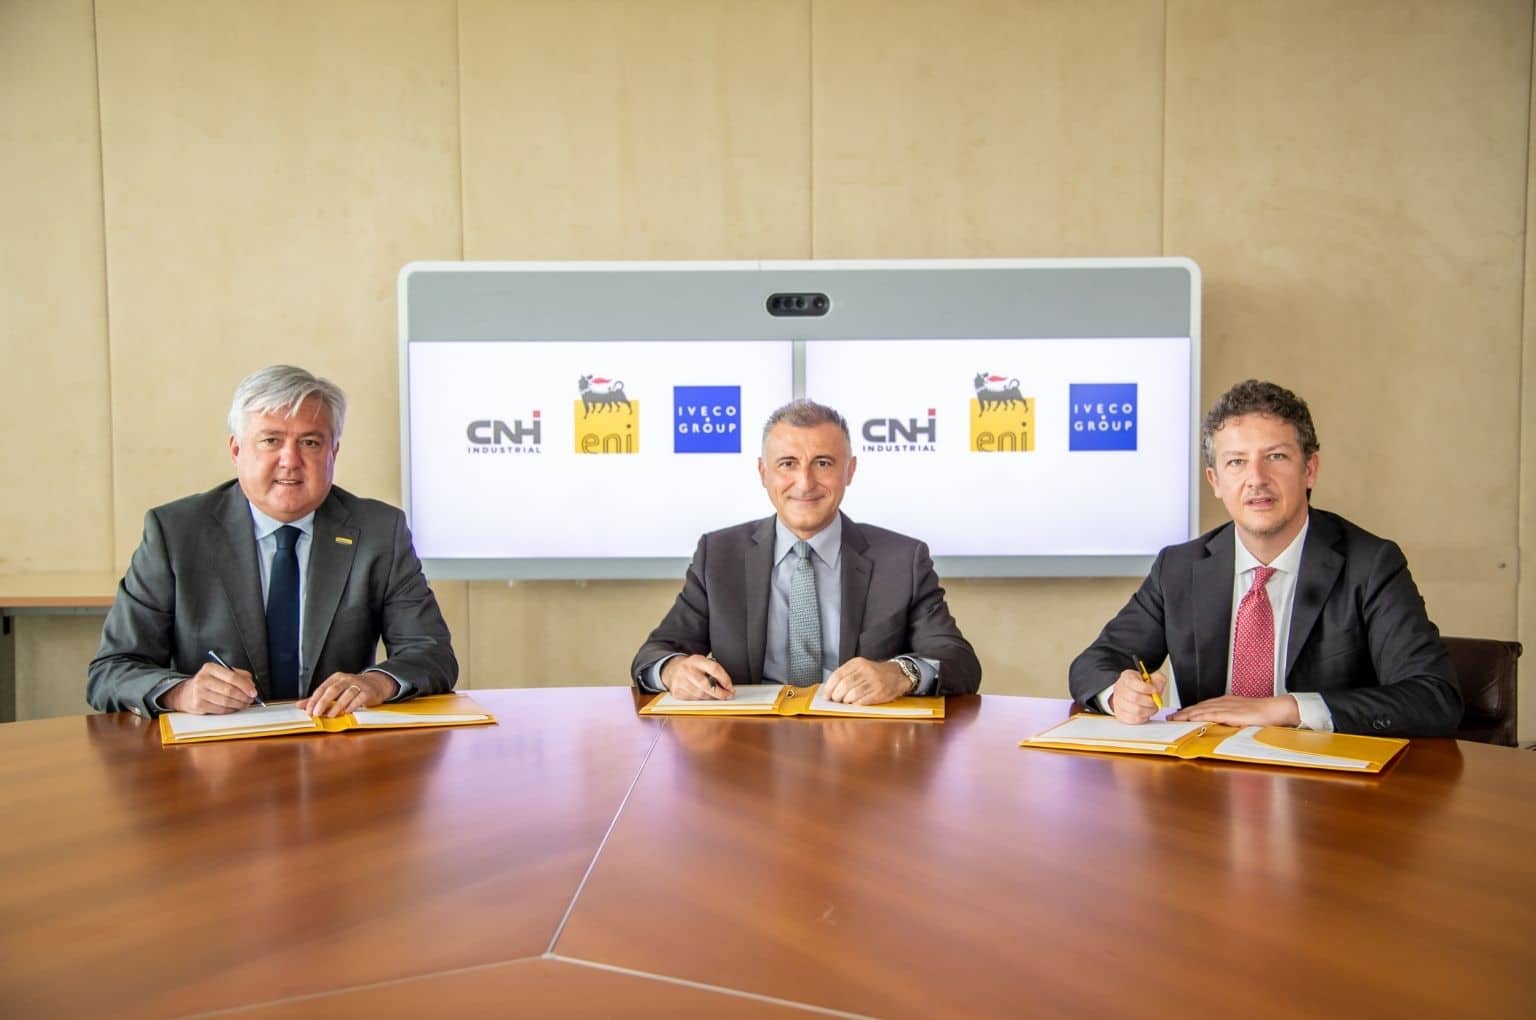 ENI, CNH Industrial, Iveco Group